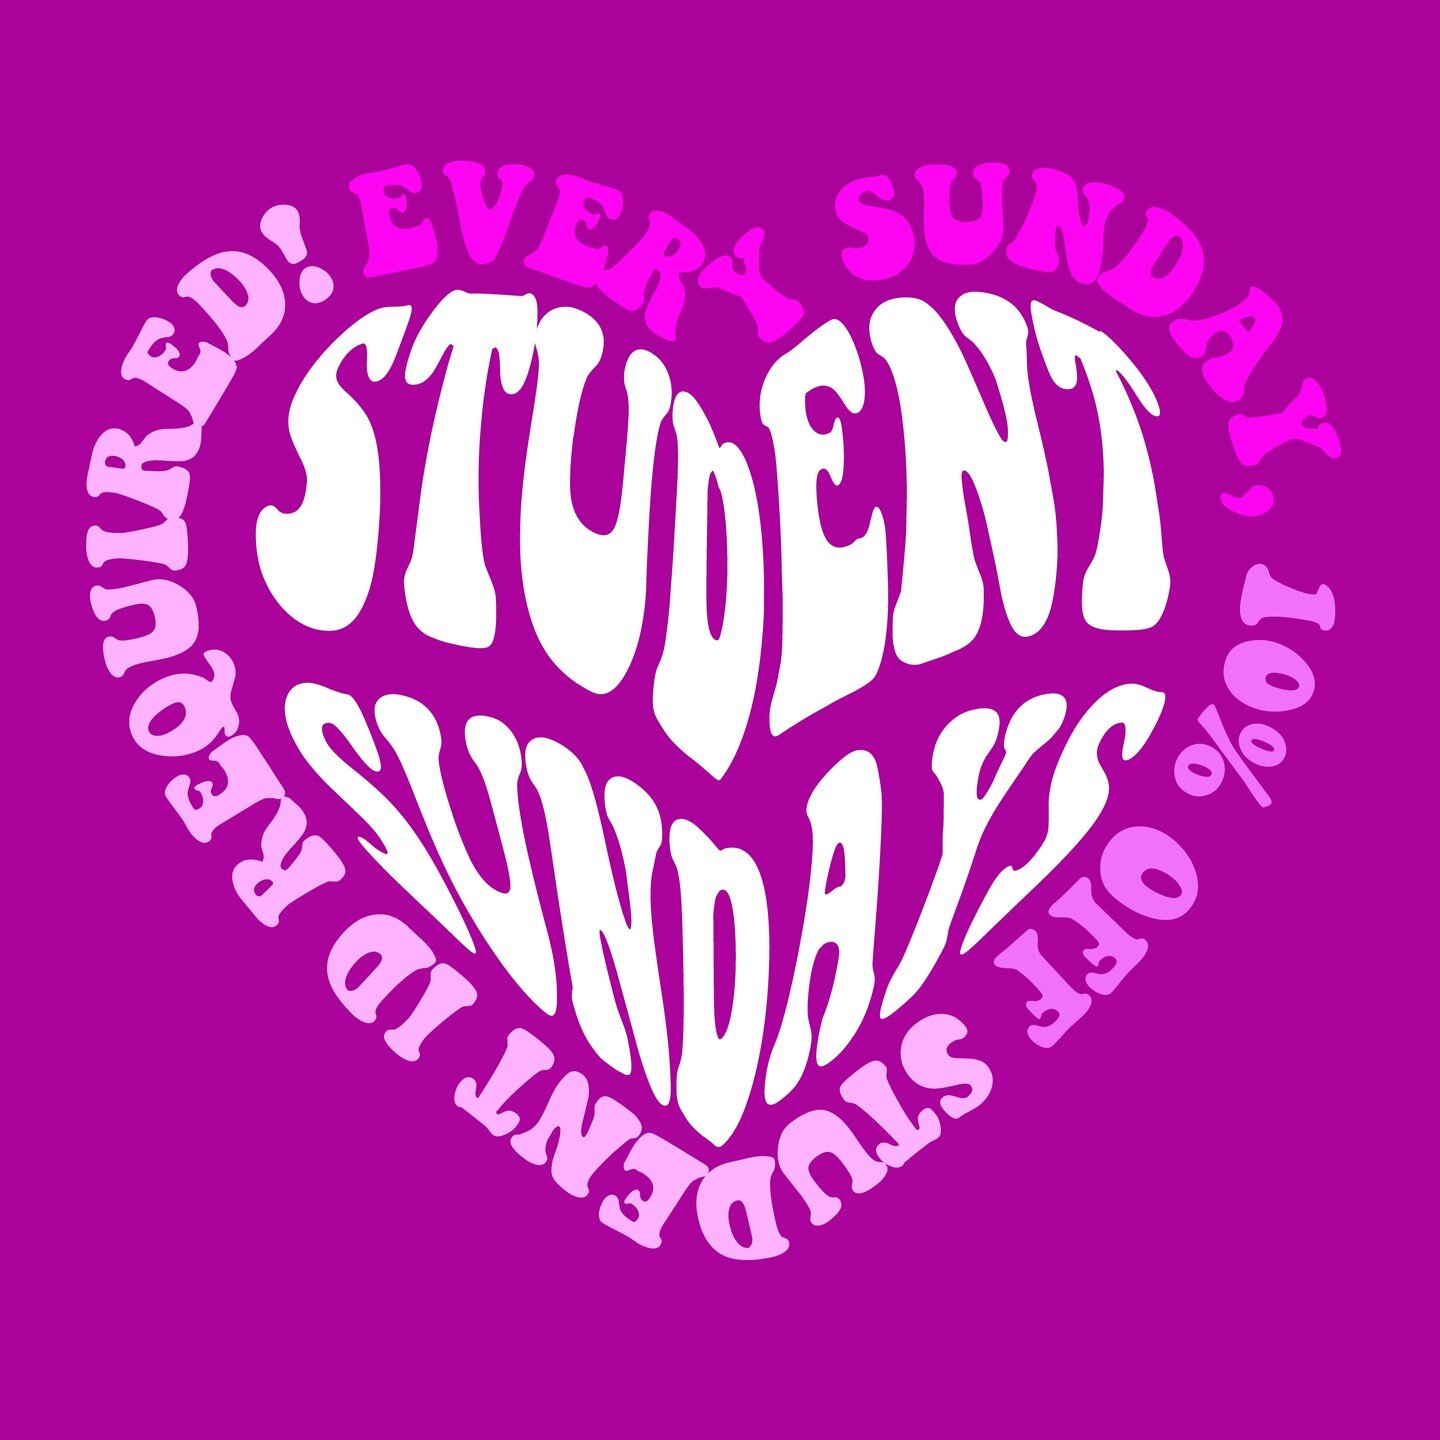 Student Sundays are BACK! Receive 10% off your ENTIRE purchase every Sunday! Student ID is required for discount ✨